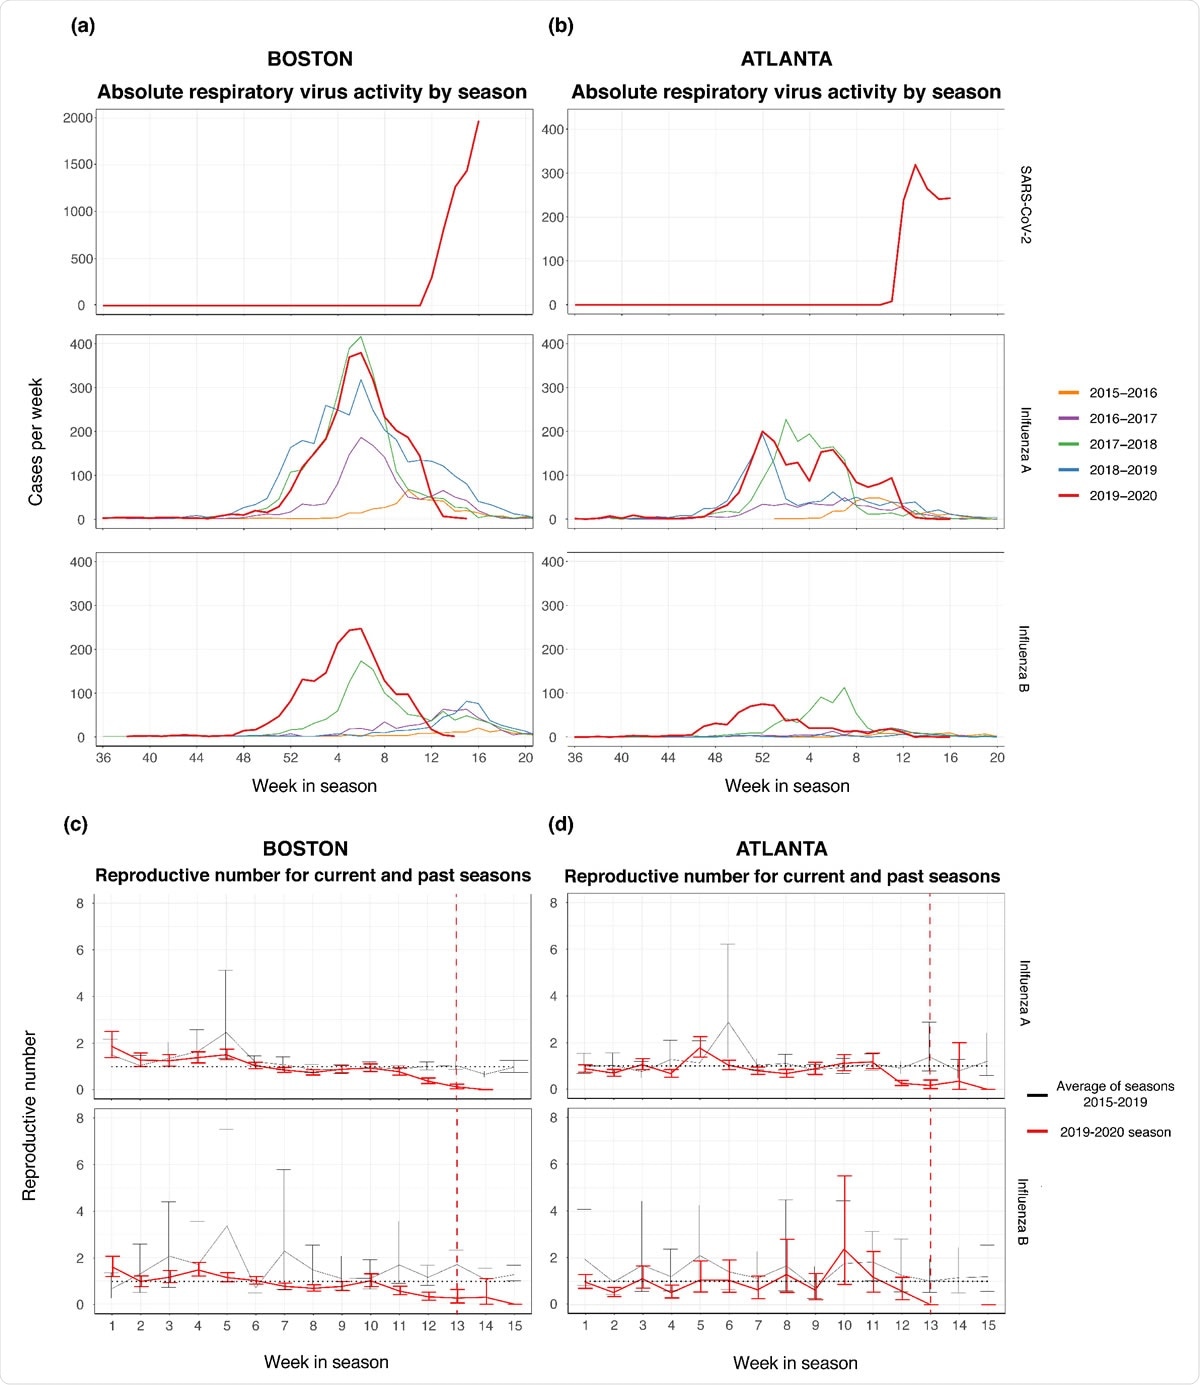 Cases per week of influenza A and Band SARS-CoV-2 of seasons 20 15-2020 in the MGB Healthcare systems in Boston (panel A) and in the Emory University in Atlanta (panel B) by week of respiratory virus season. Note the change in y-ax is scale for Boston SARS-CoV-2 cases (panel A). Comparison of the reproductive number over time, R,, for influenza A and B in prior seasons (the average of the 20 I 5-201 6 through 20I 8-20 19 seasons, as depicted by the black line) versus the 20 19-2020 season as depicted by the red li ne, for Boston (panel C) and Atlanta (panel D). The black dotted horizontal line denotes R, of 1.0. The red dotted vertical line represent the approximate date when NPls were initiated in Atlanta and Boston (week 13).